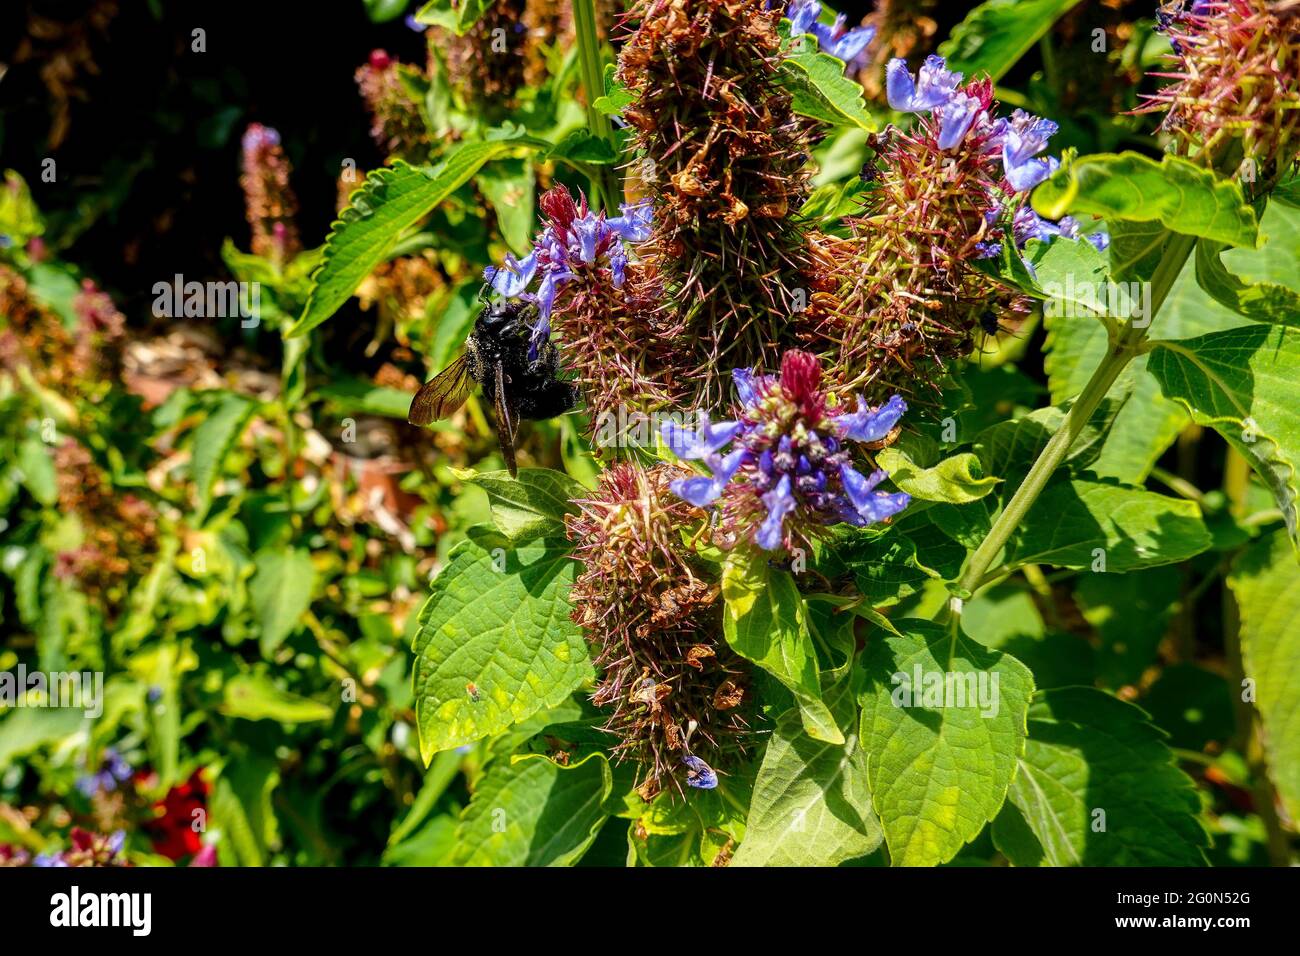 carpenter bee Xylocopa Latreille on a witches hat plant Pycnostachys urticifolia growing in Souther California, USA Stock Photo